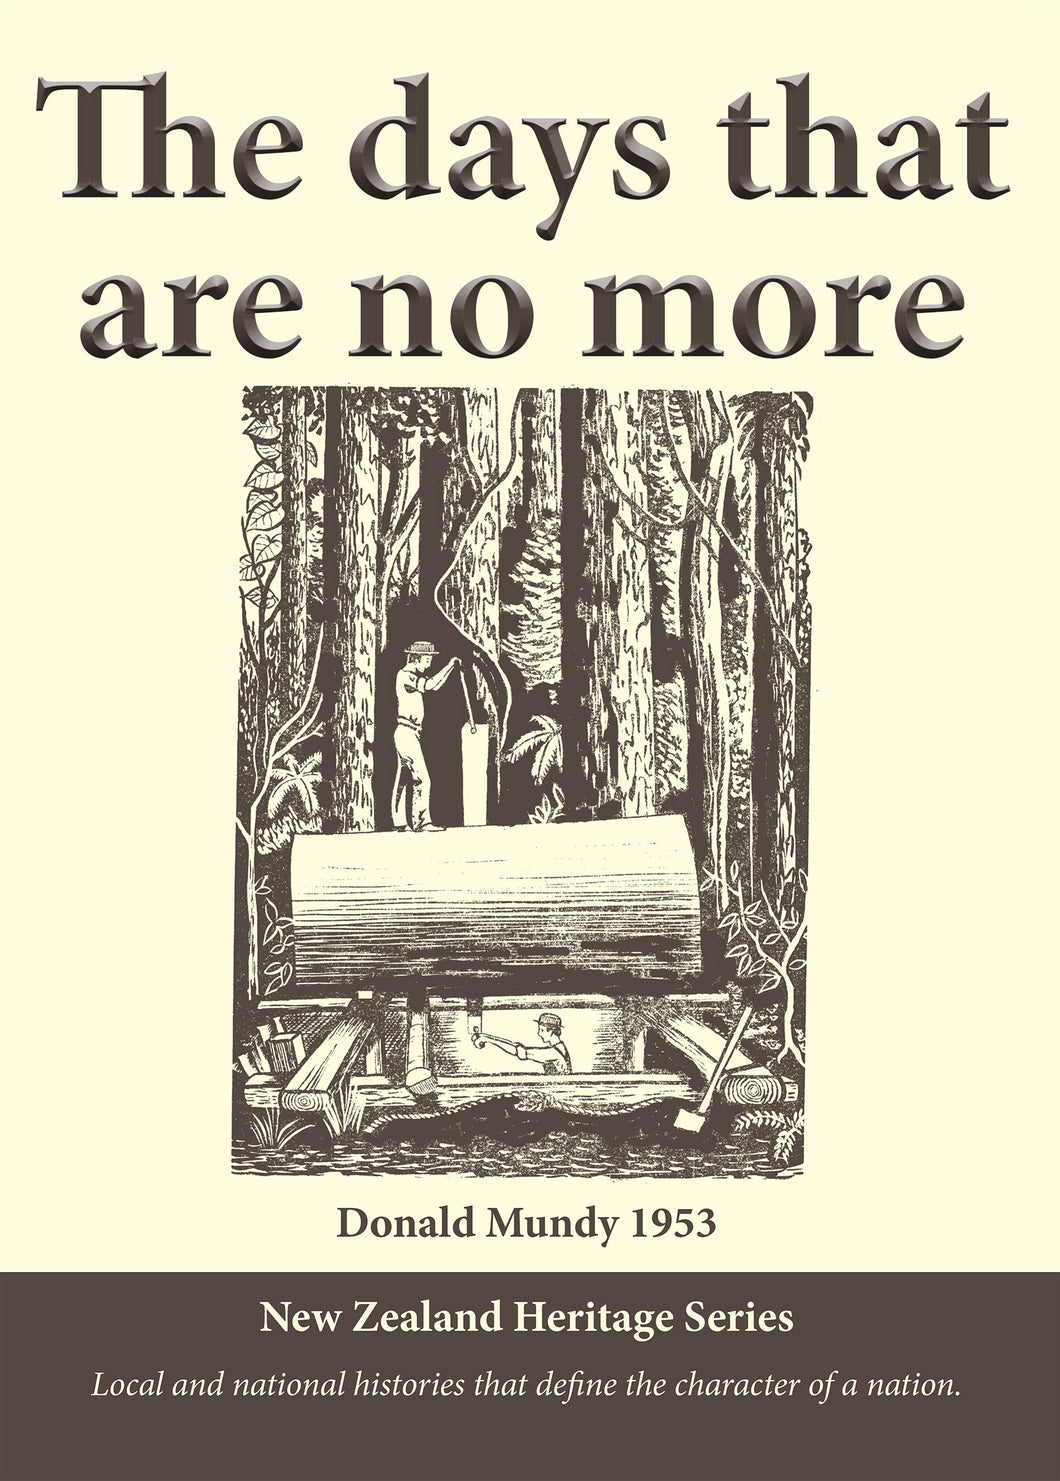 The Days that are No More by Donald Mundy